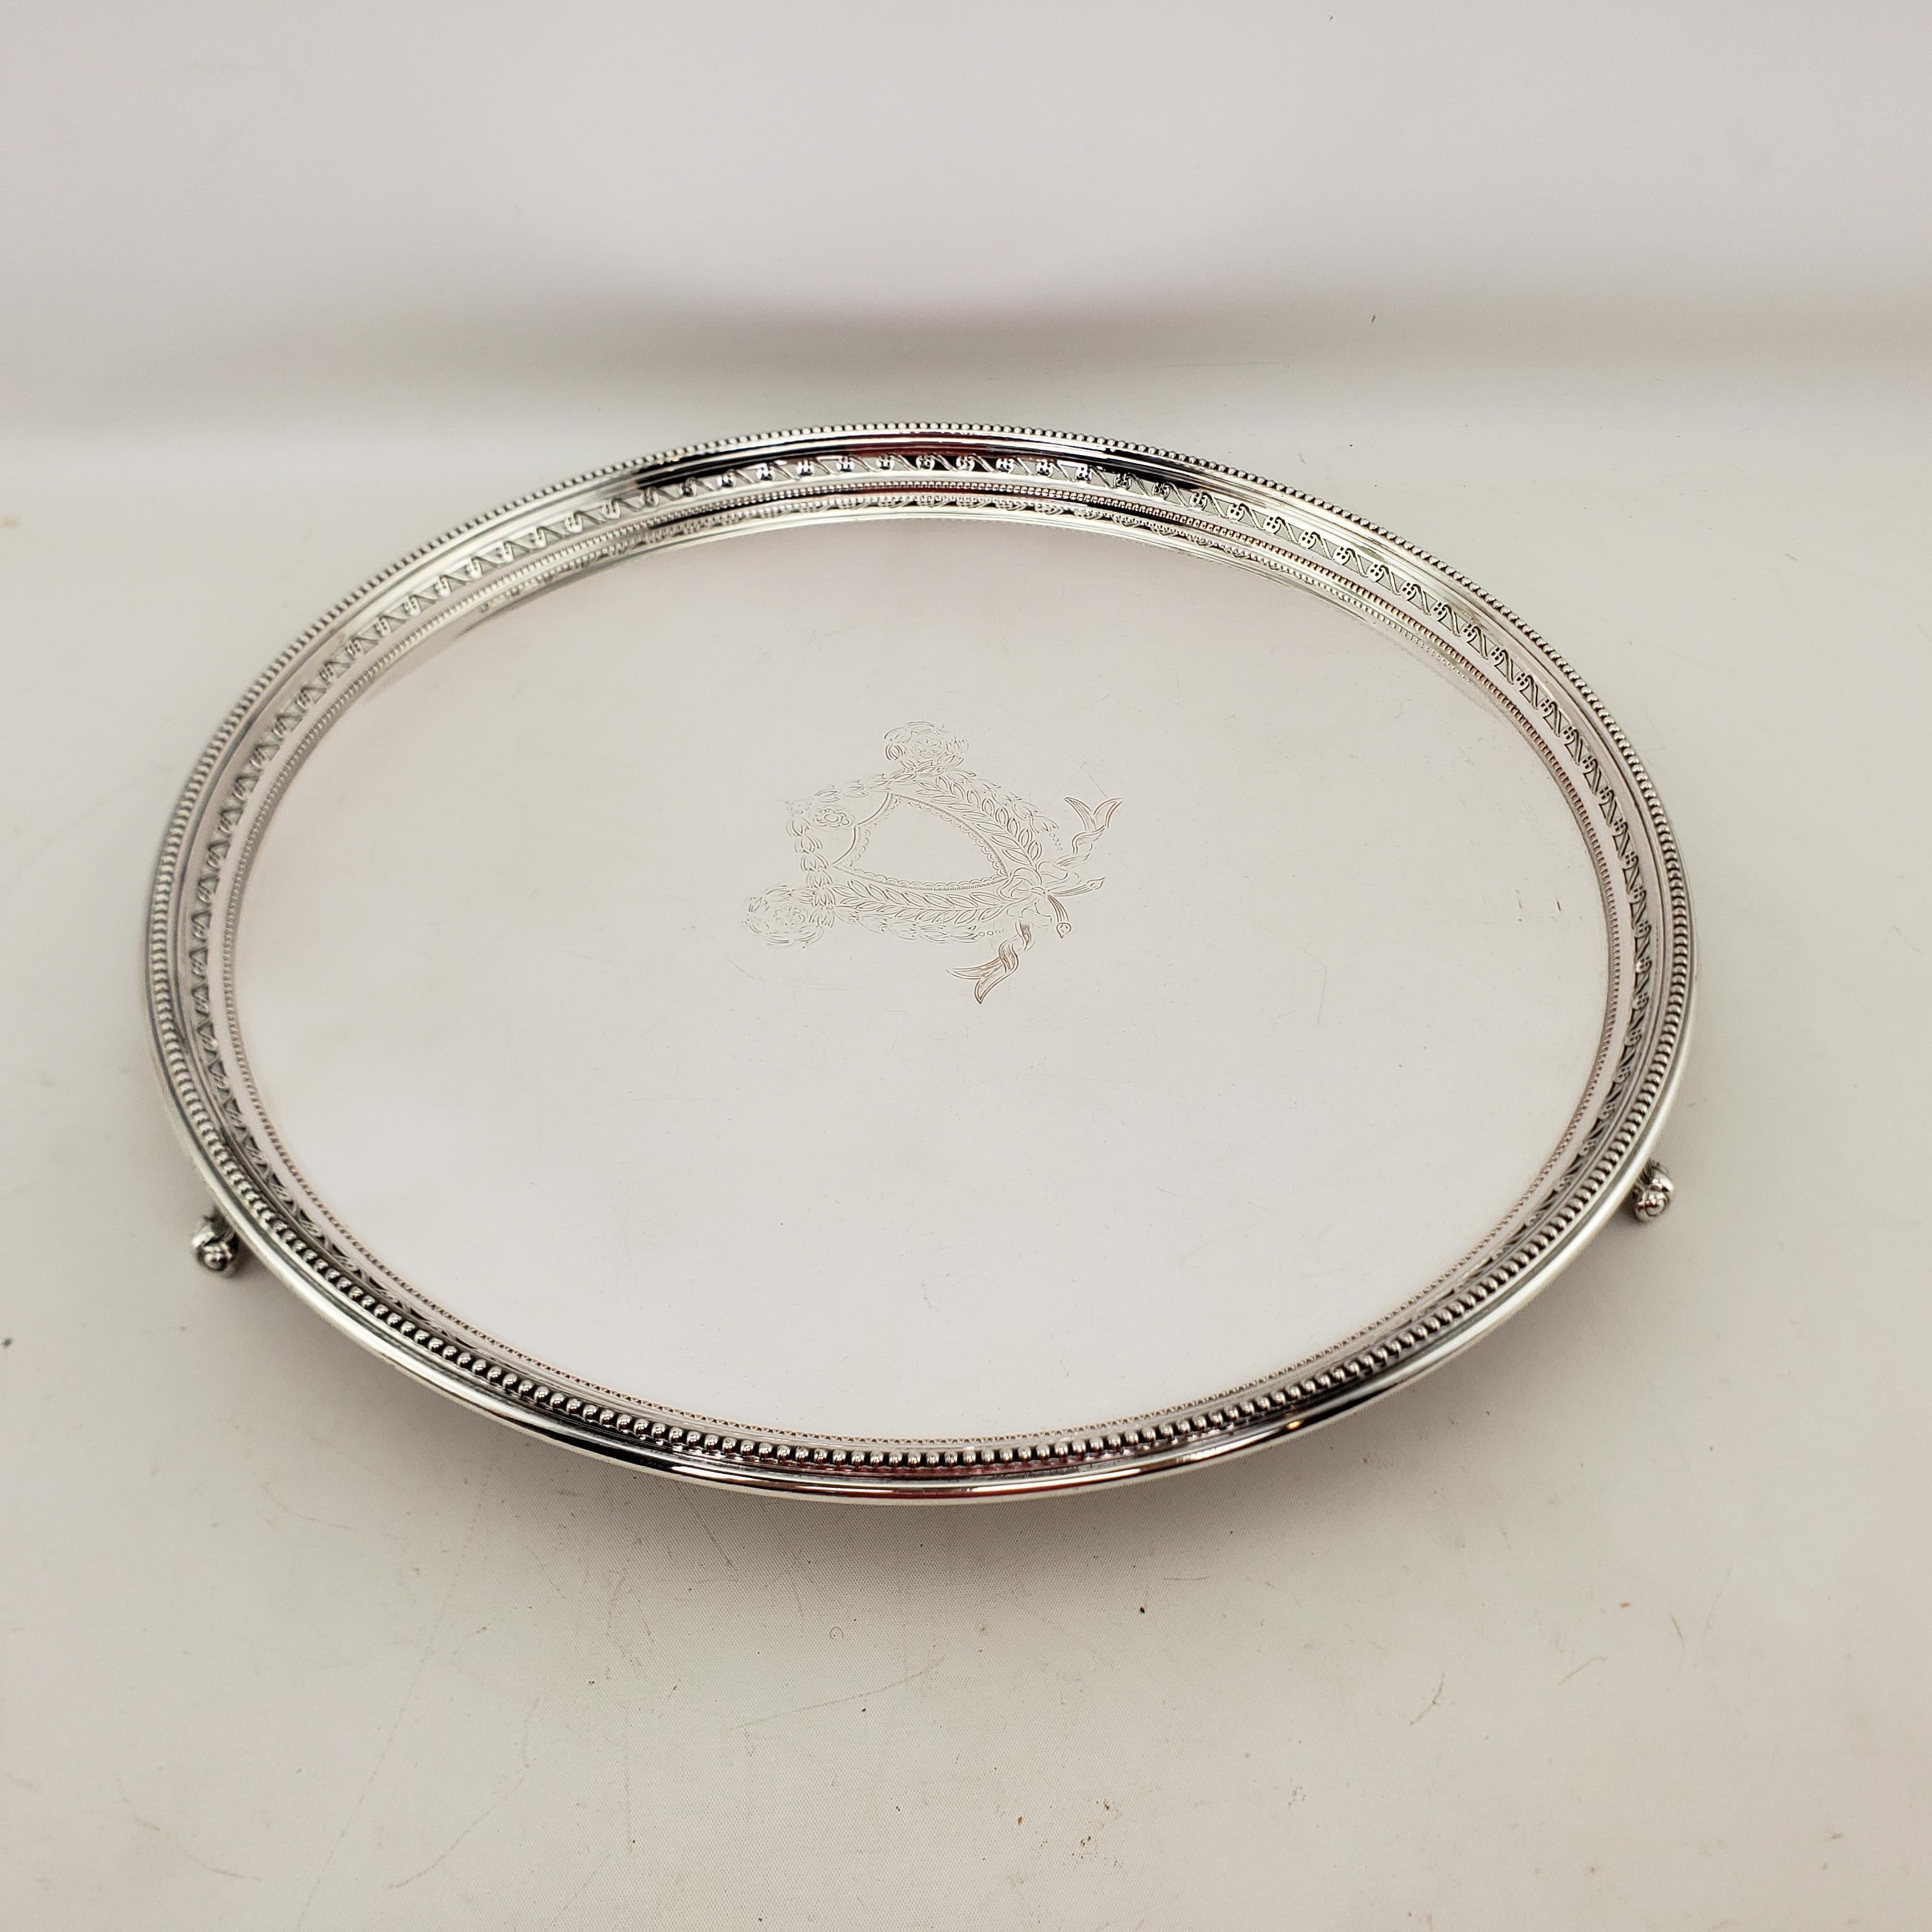 English Antique Silver Plated Barker Ellis Round Footed Serving Tray or Salva